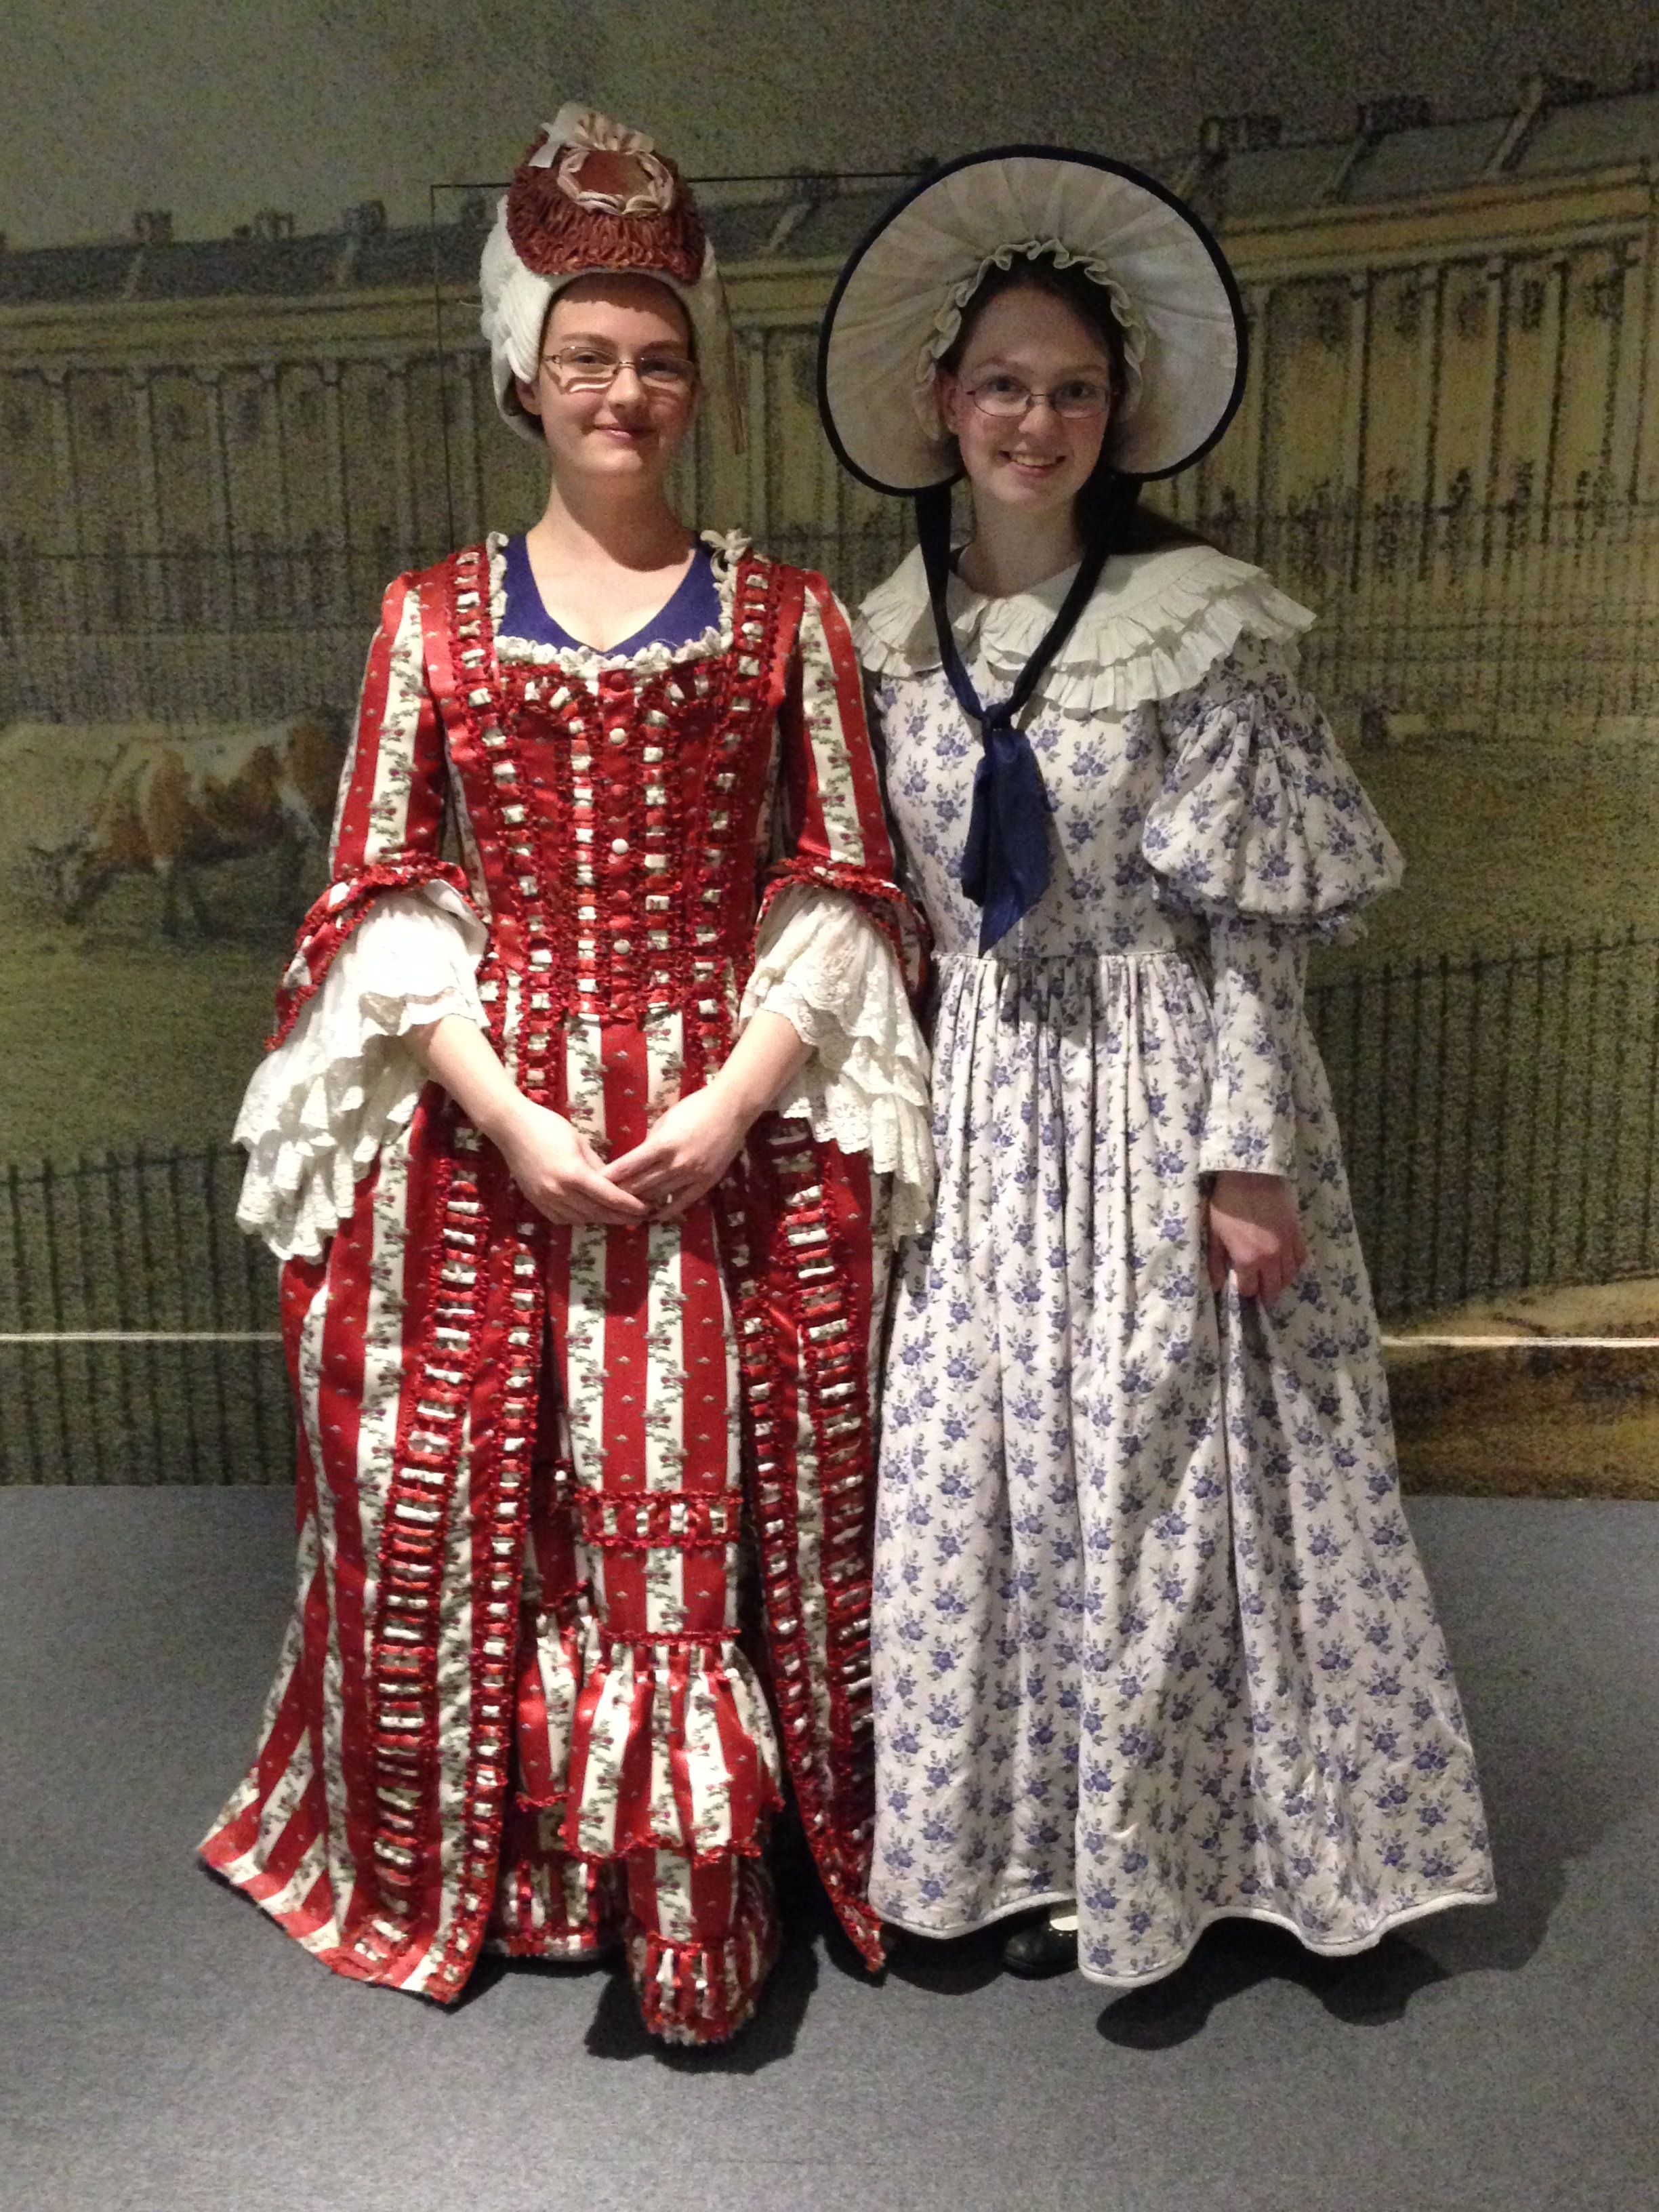  My sister in an 18th-century costume and wig, me in a 19th-century costume and hat. 